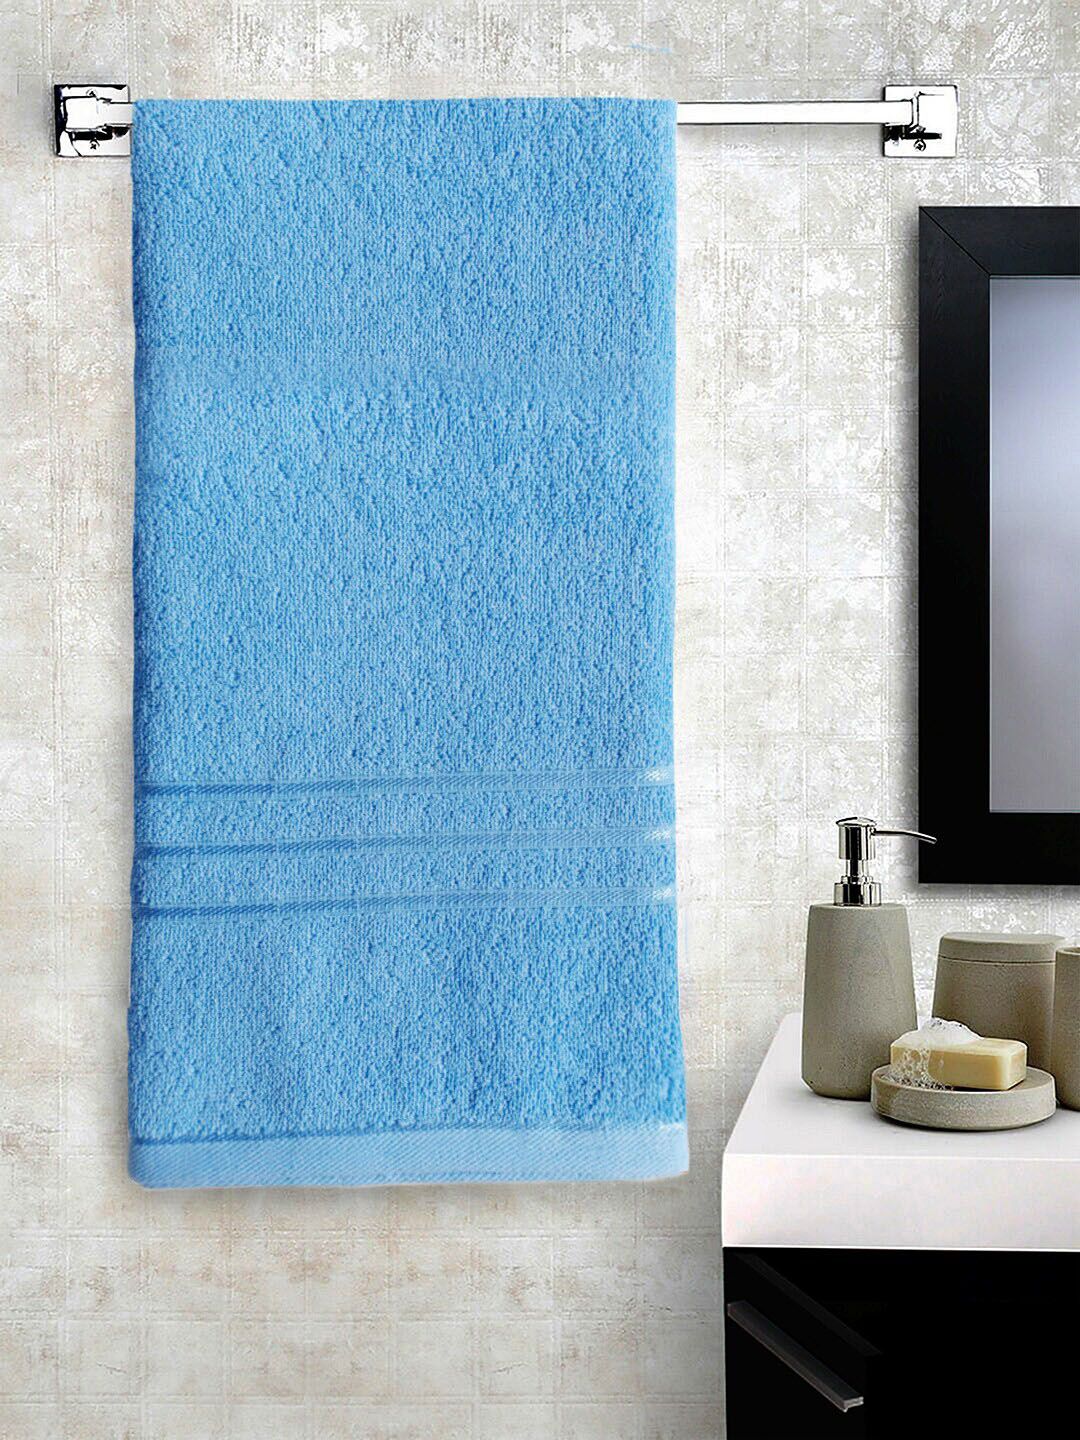 Lushomes Set of 5 Blue Solid Cotton Bath Towels Price in India